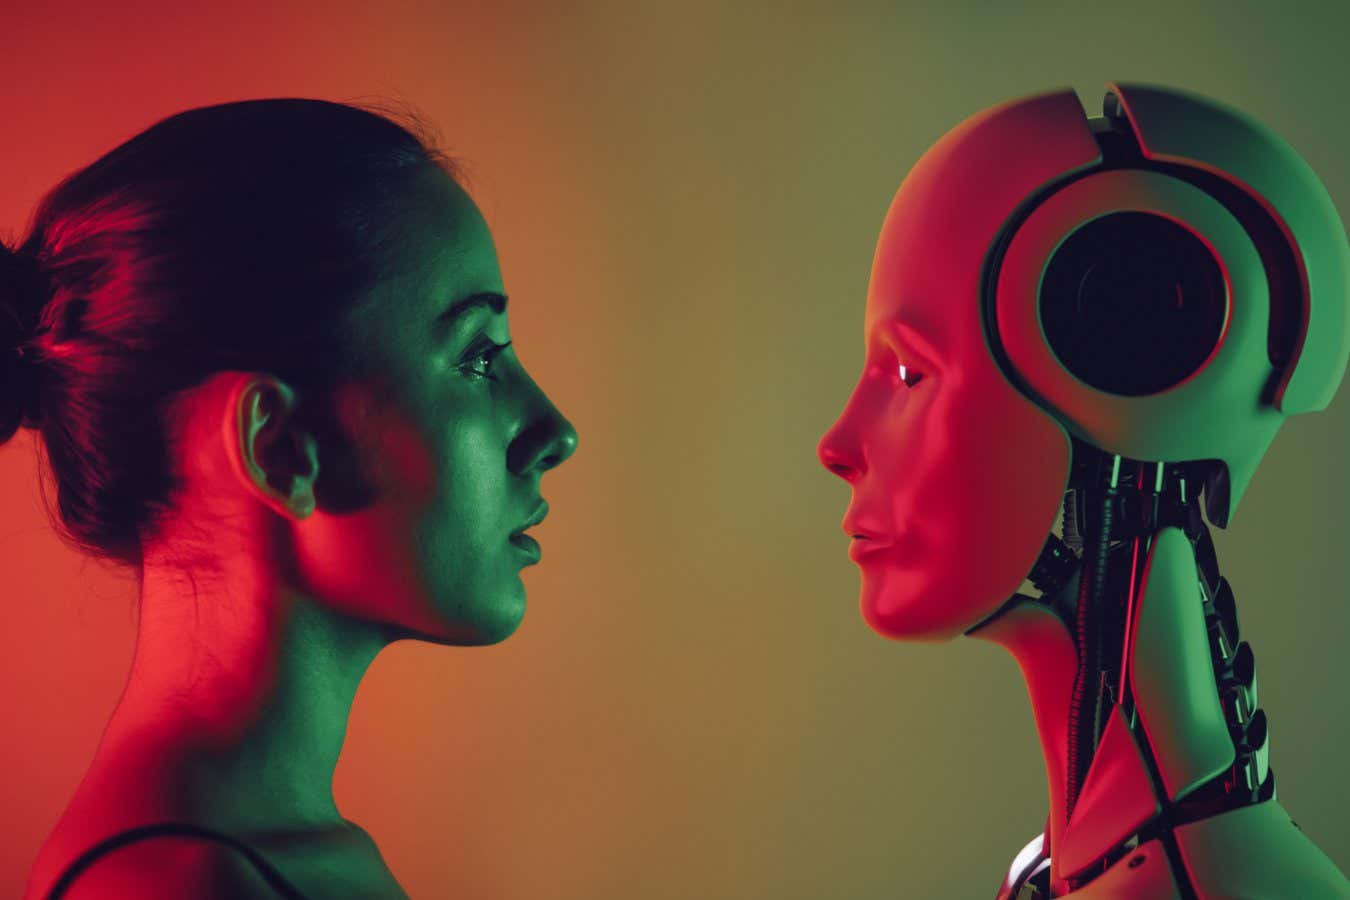 AI chatbots beat humans at persuading their opponents in debates